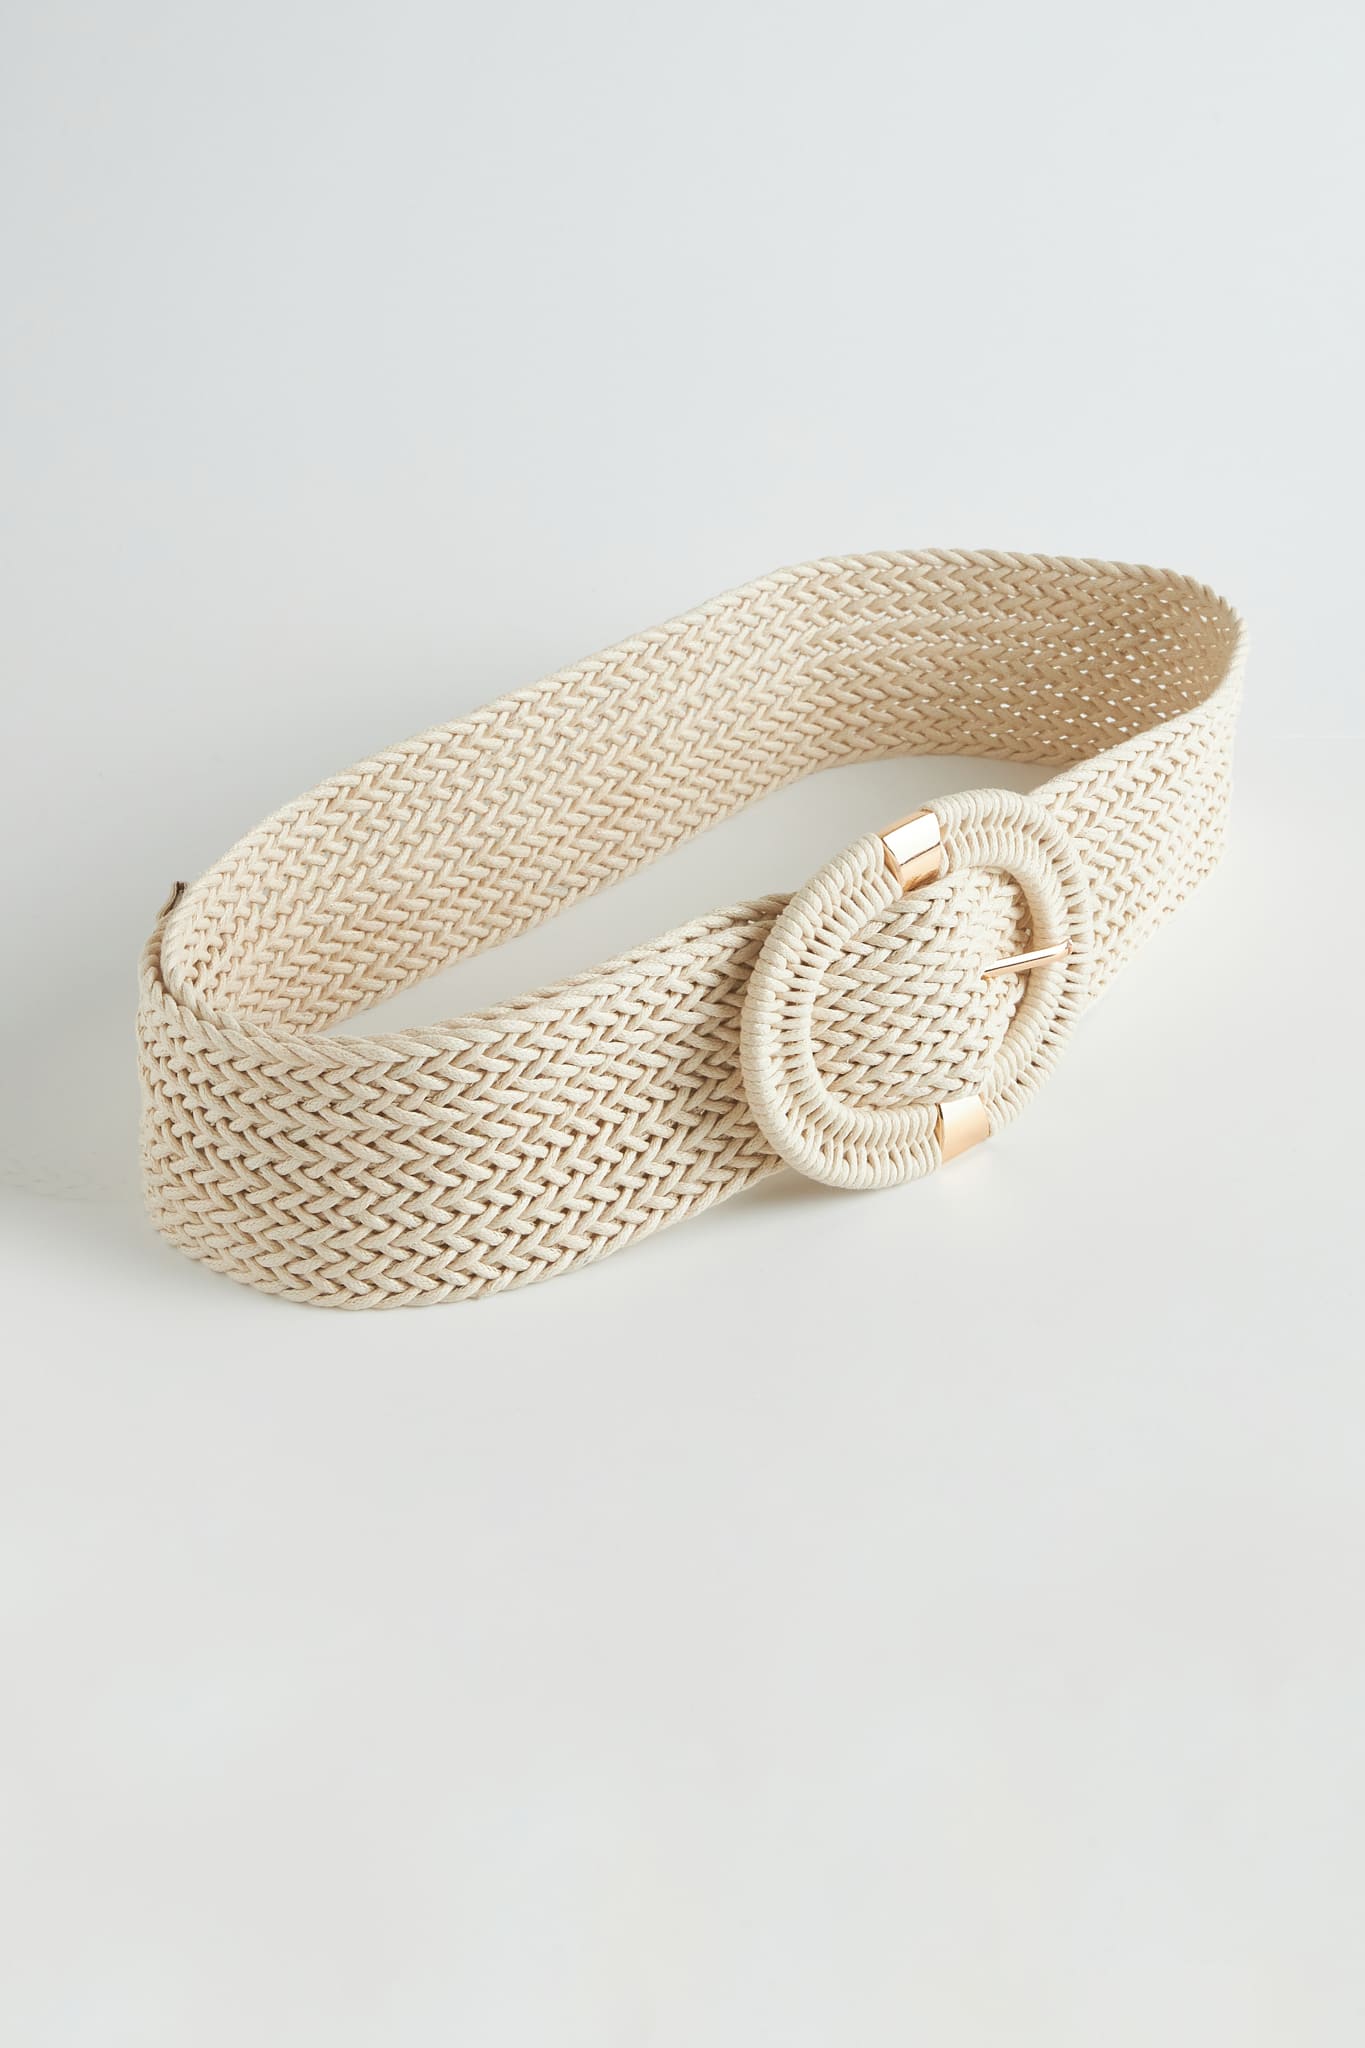 Picture of Straw wide belt